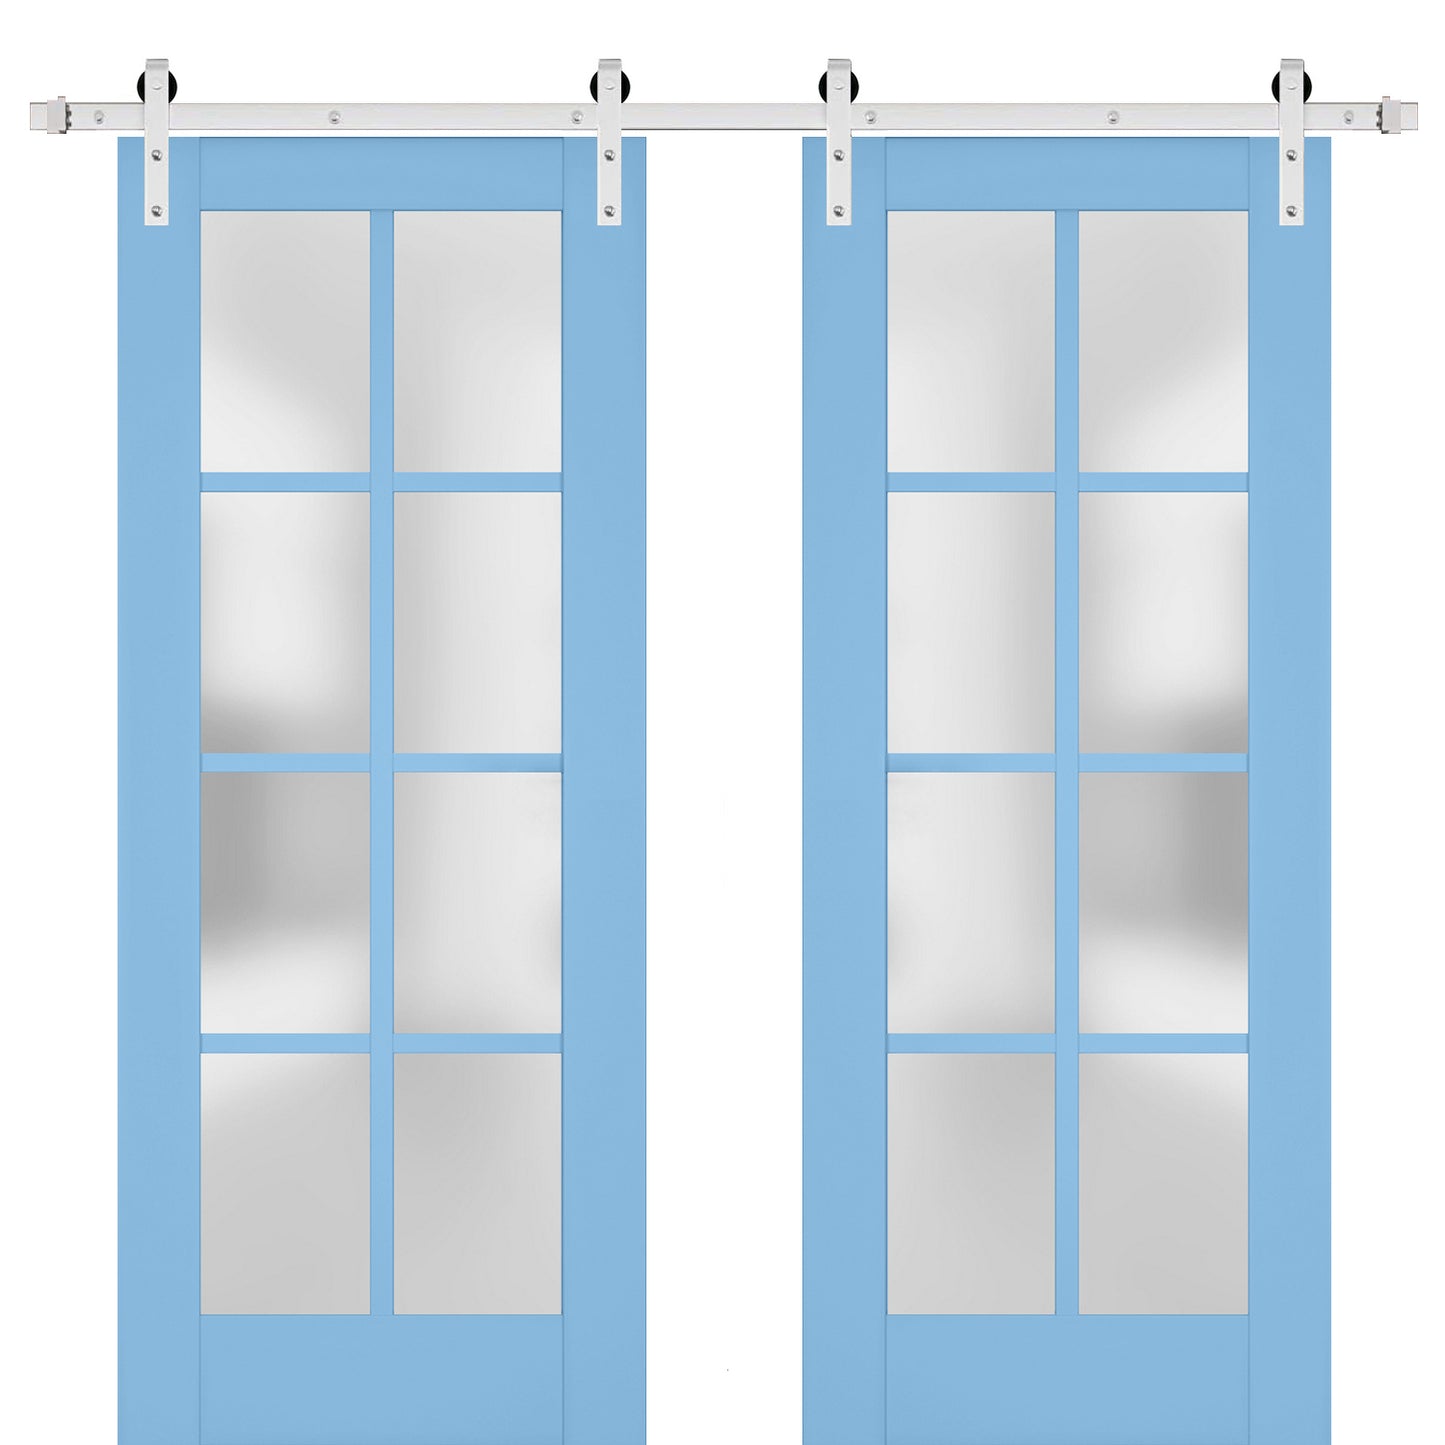 Veregio 7412 Aquamarine Double Barn Door with Frosted Glass and Silver Finish Rail